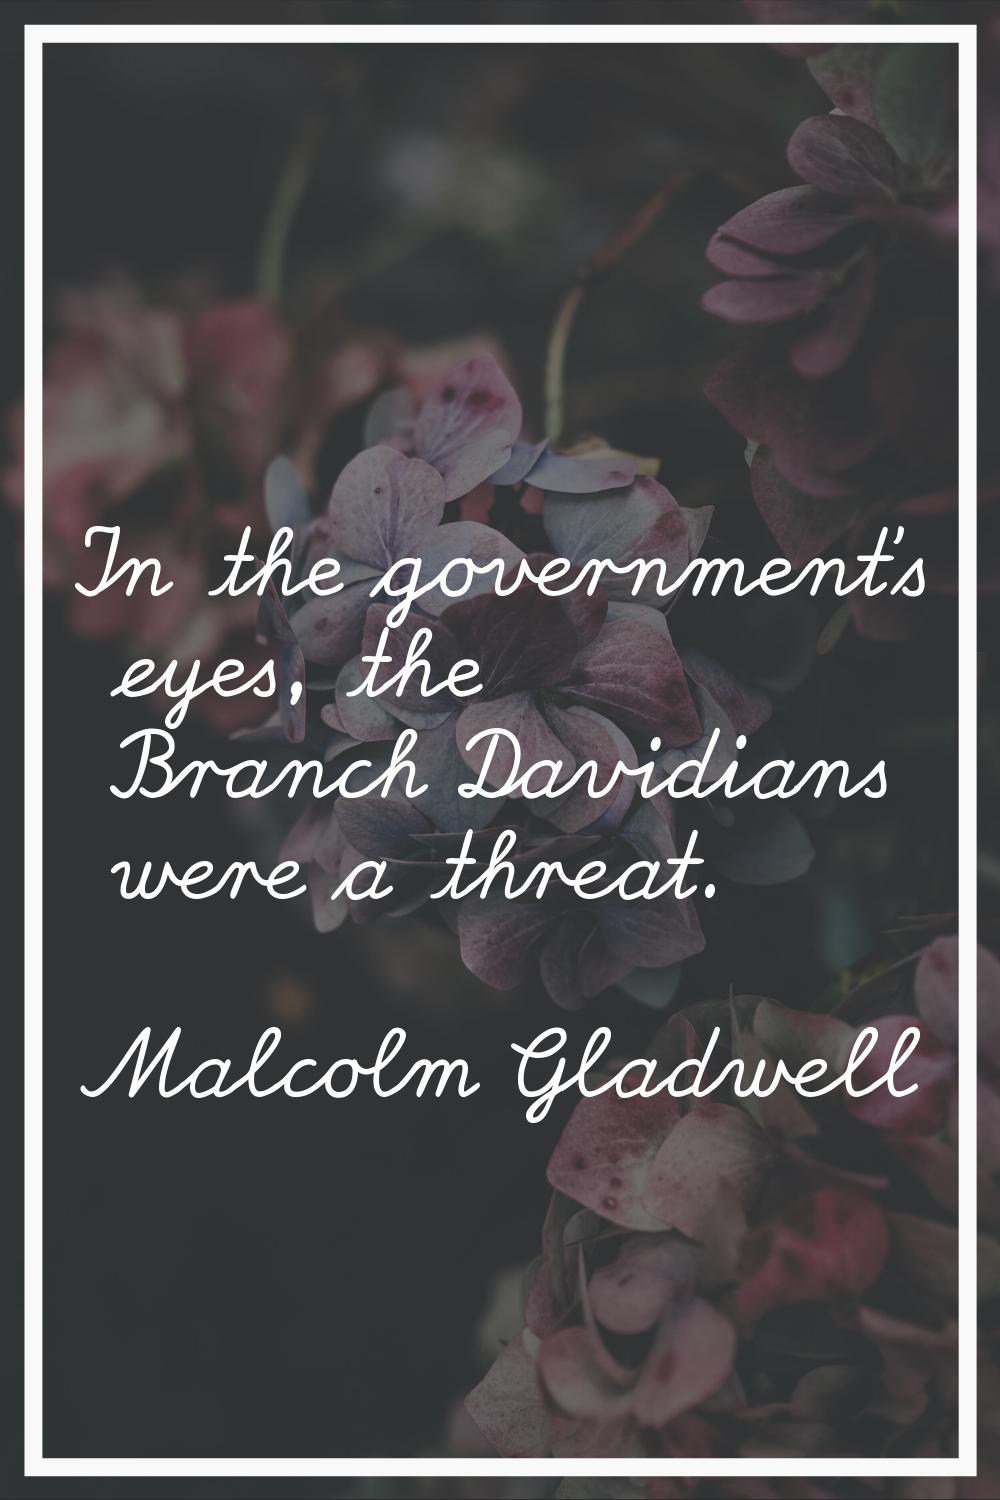 In the government's eyes, the Branch Davidians were a threat.